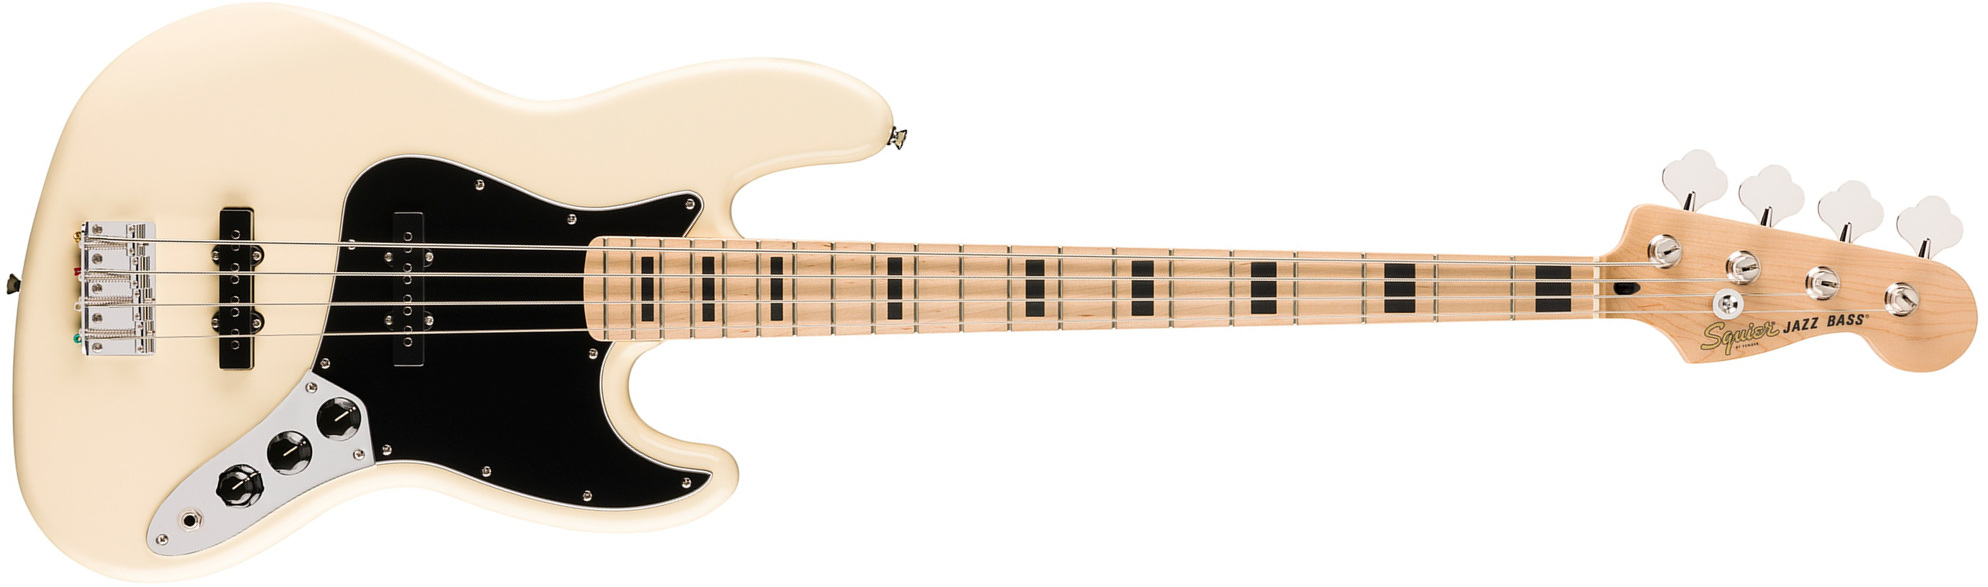 Squier Jazz Bass Active Affinity Mn - Olympic White - Solid body elektrische bas - Main picture